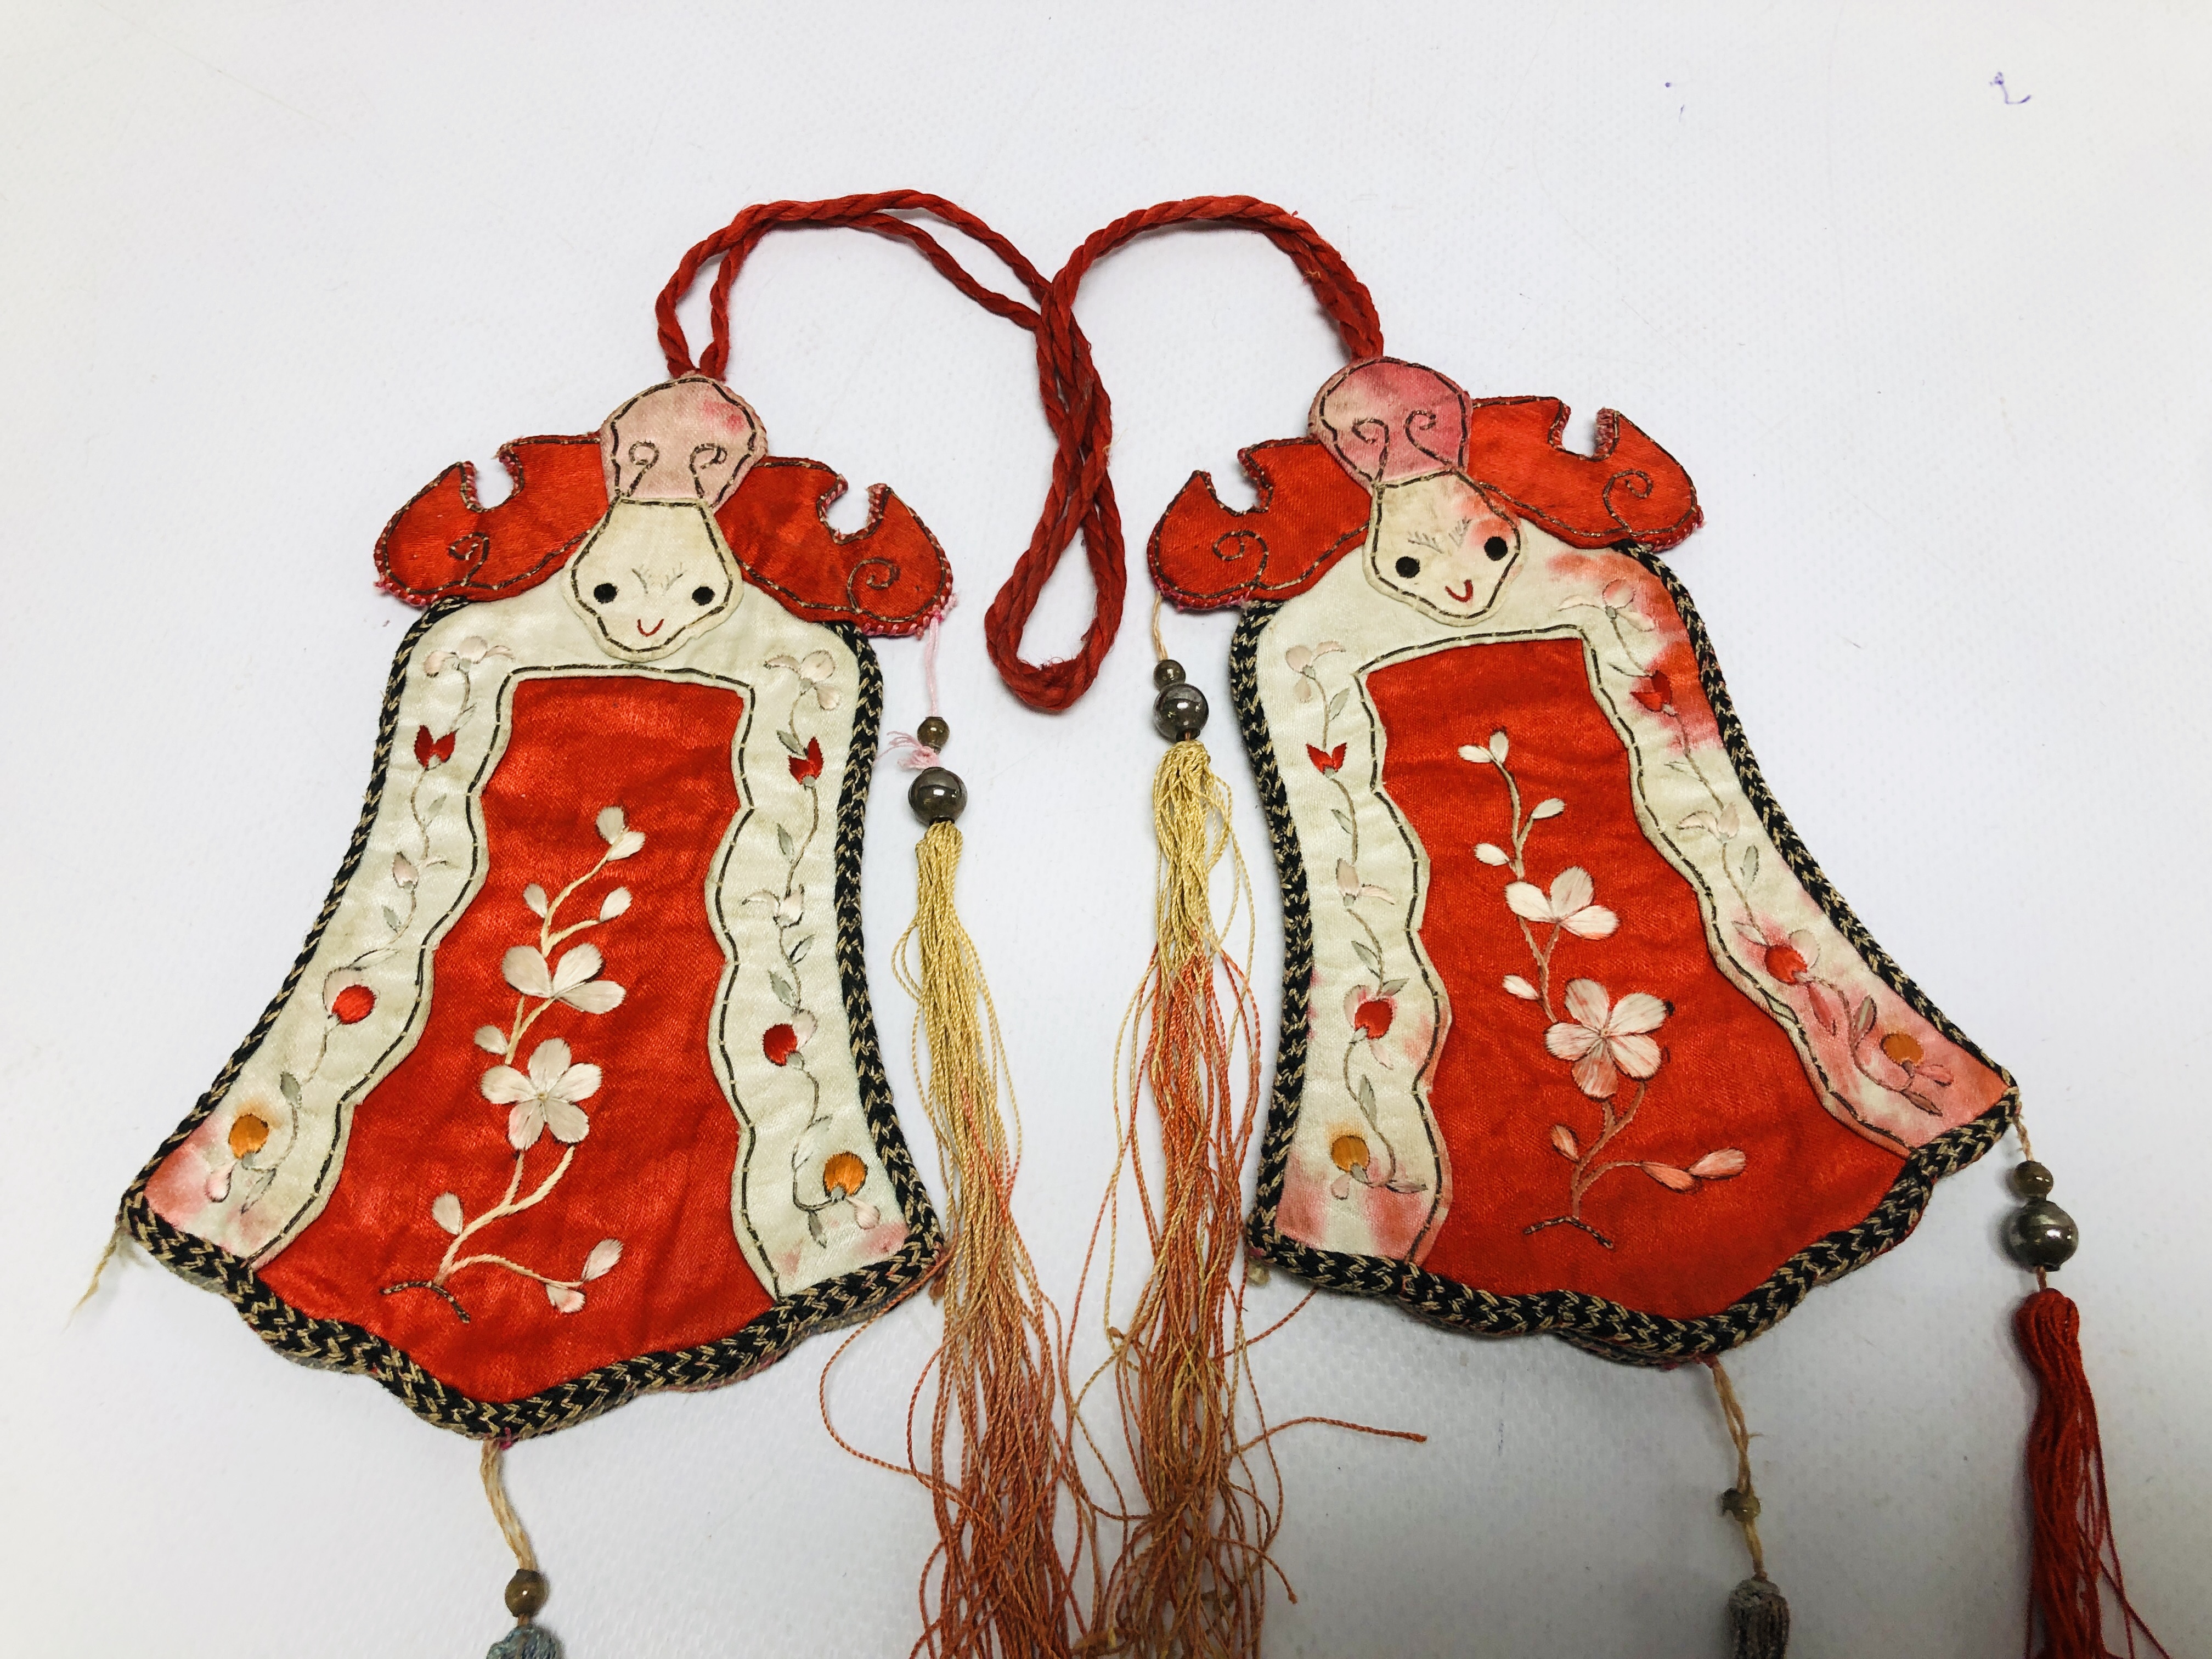 AN ORIENTAL VINTAGE SILK EMBRIODERED HANGING ALONG WITH A MINIATURE HANDMADE DOLL A/F - Image 8 of 8